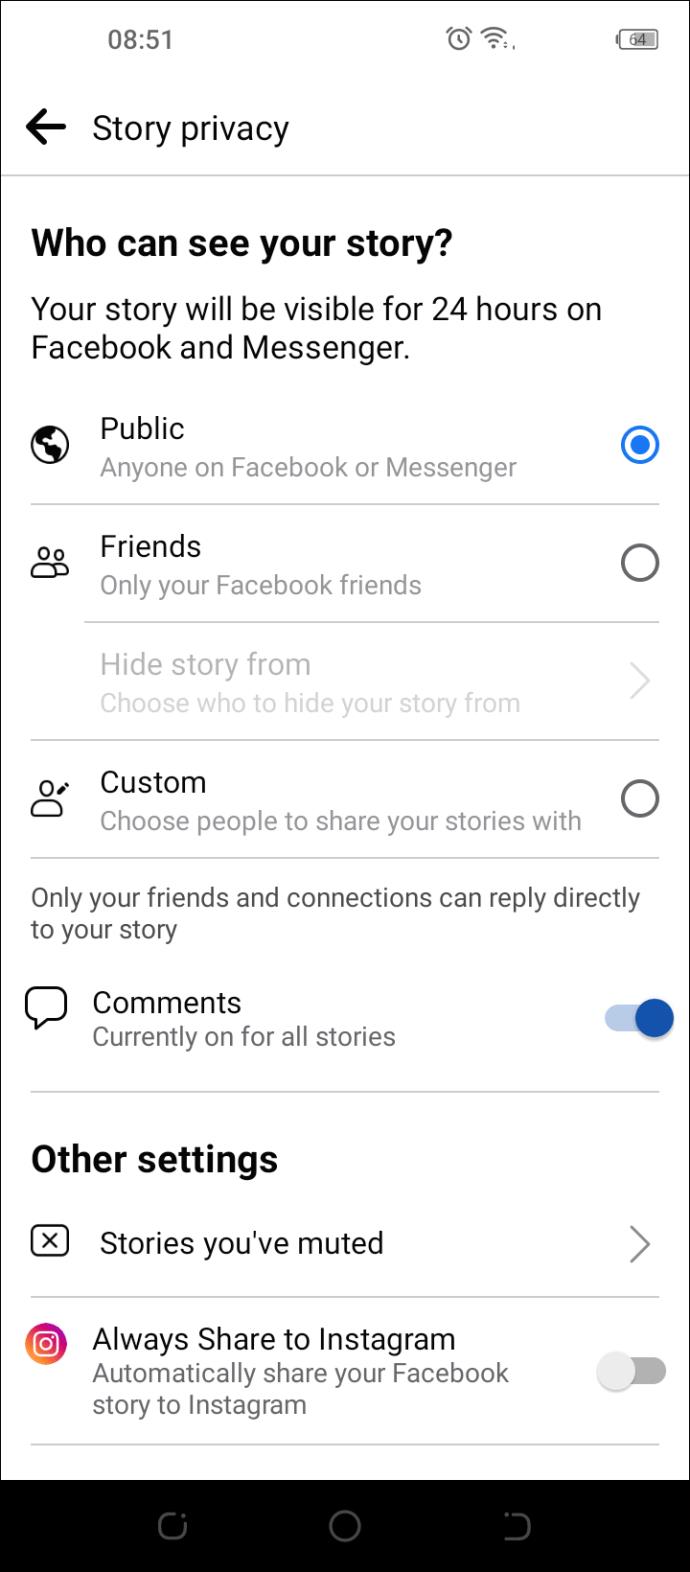 How To Create A Facebook Story On A PC, IPhone, Or Android